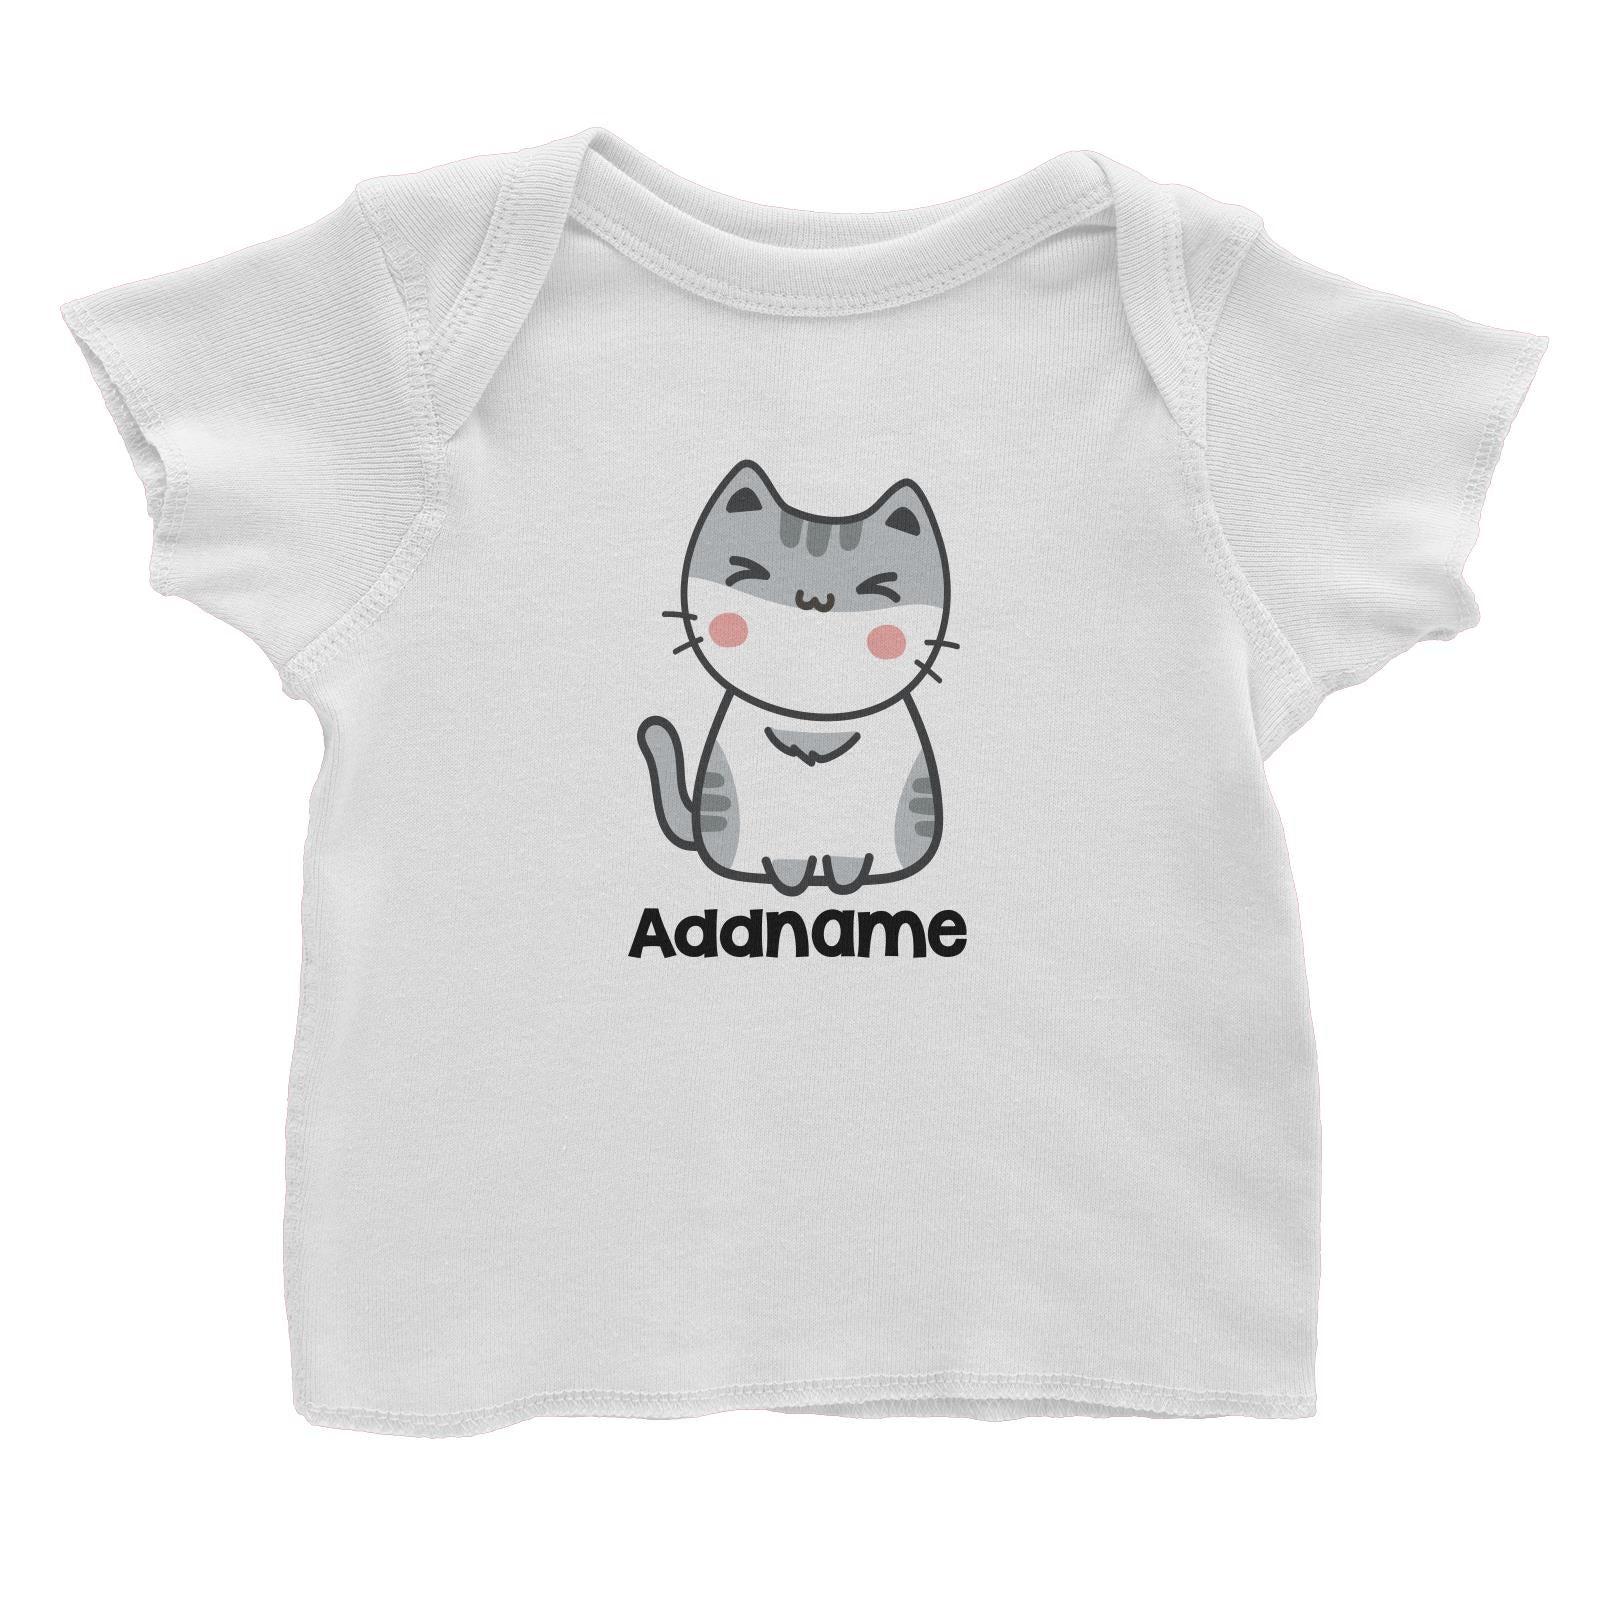 Drawn Adorable Cats White & Grey Addname Baby T-Shirt